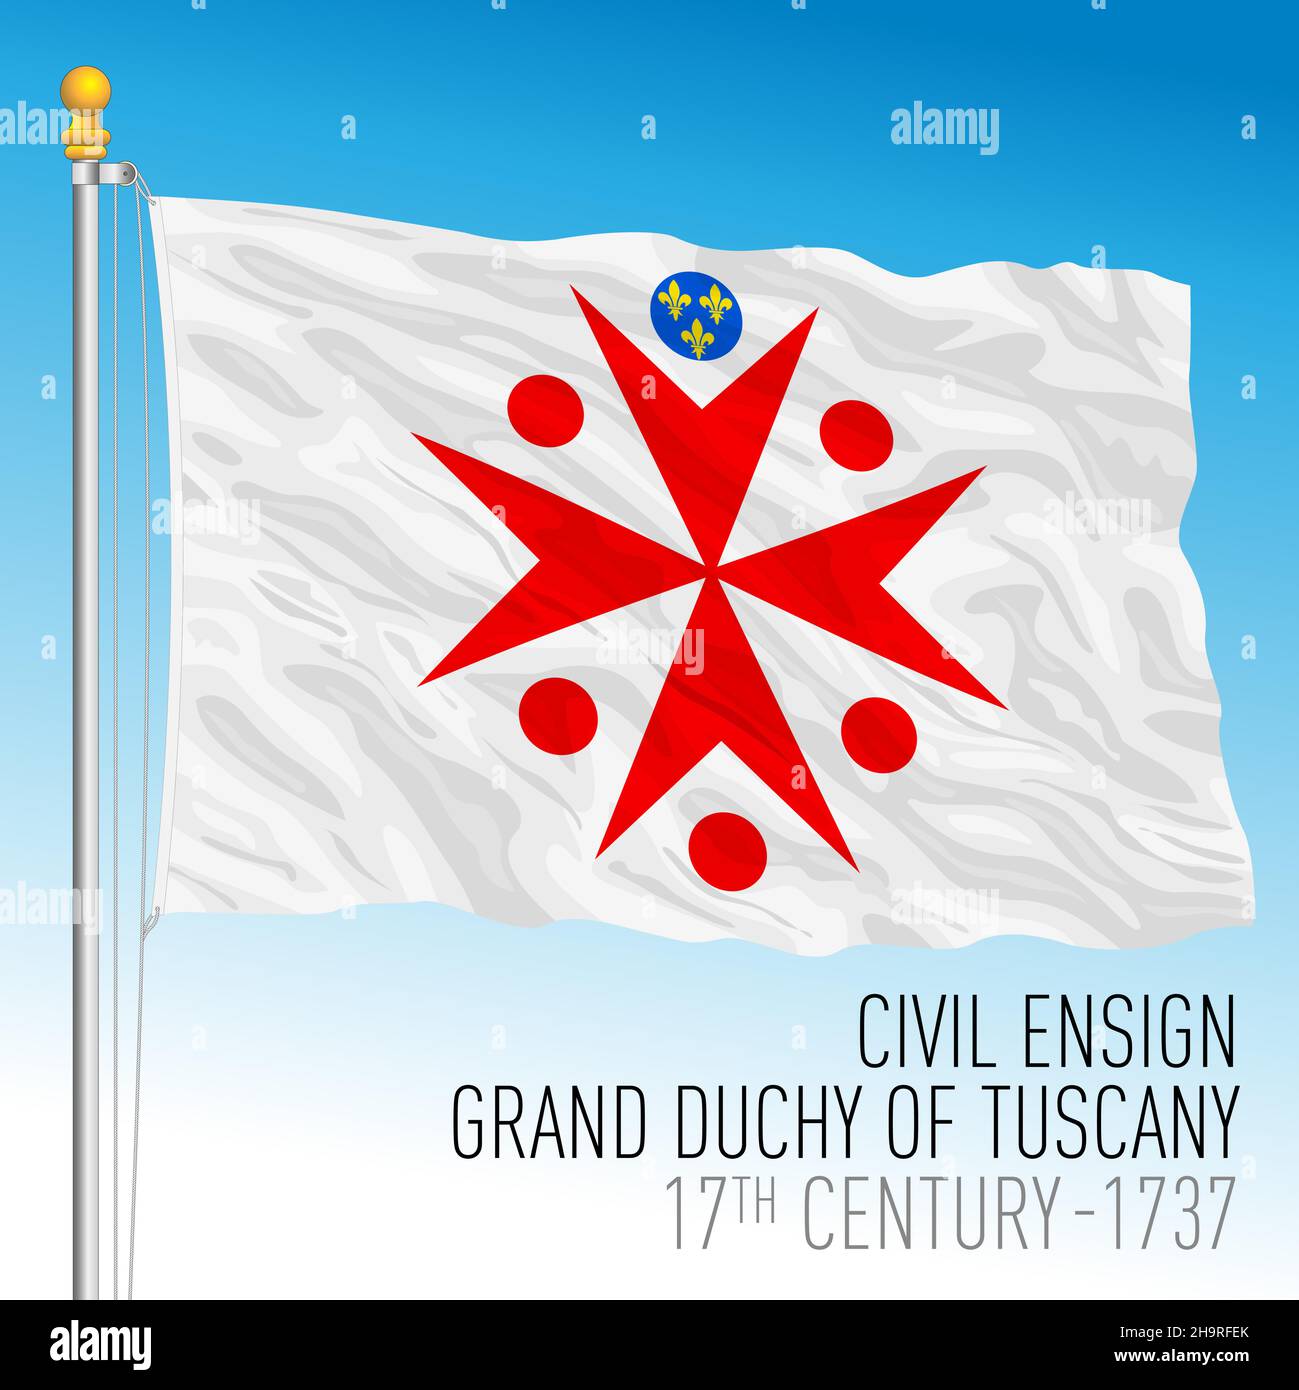 Grand Duchy of Tuscany, civil ensign historical flag, Italy, 17th century-1737, vector illustration Stock Vector